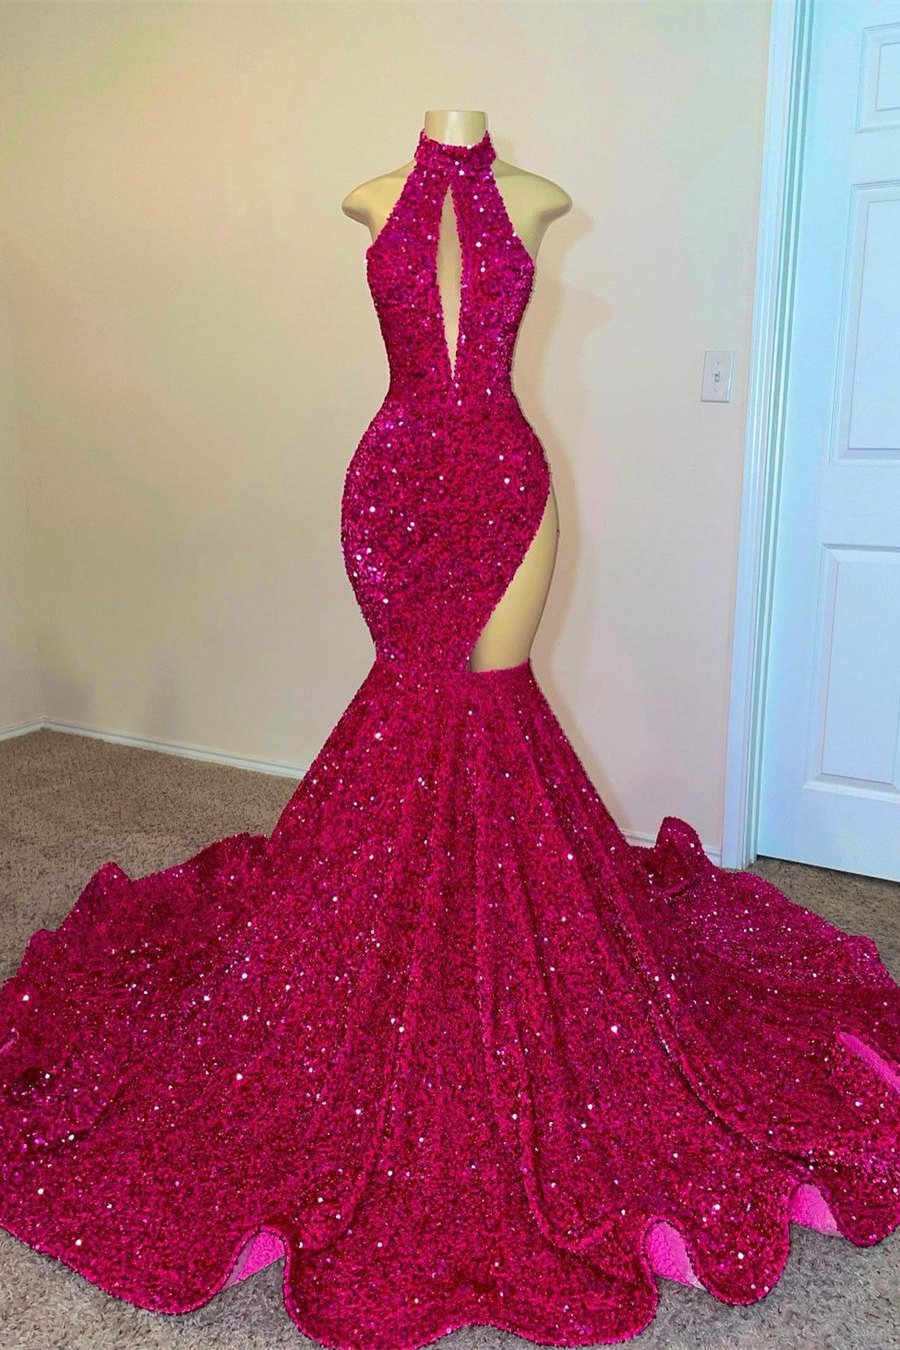 Fuchsia High Neck Sleeveless Mermaid Long Prom Dress With Sequins PD0739